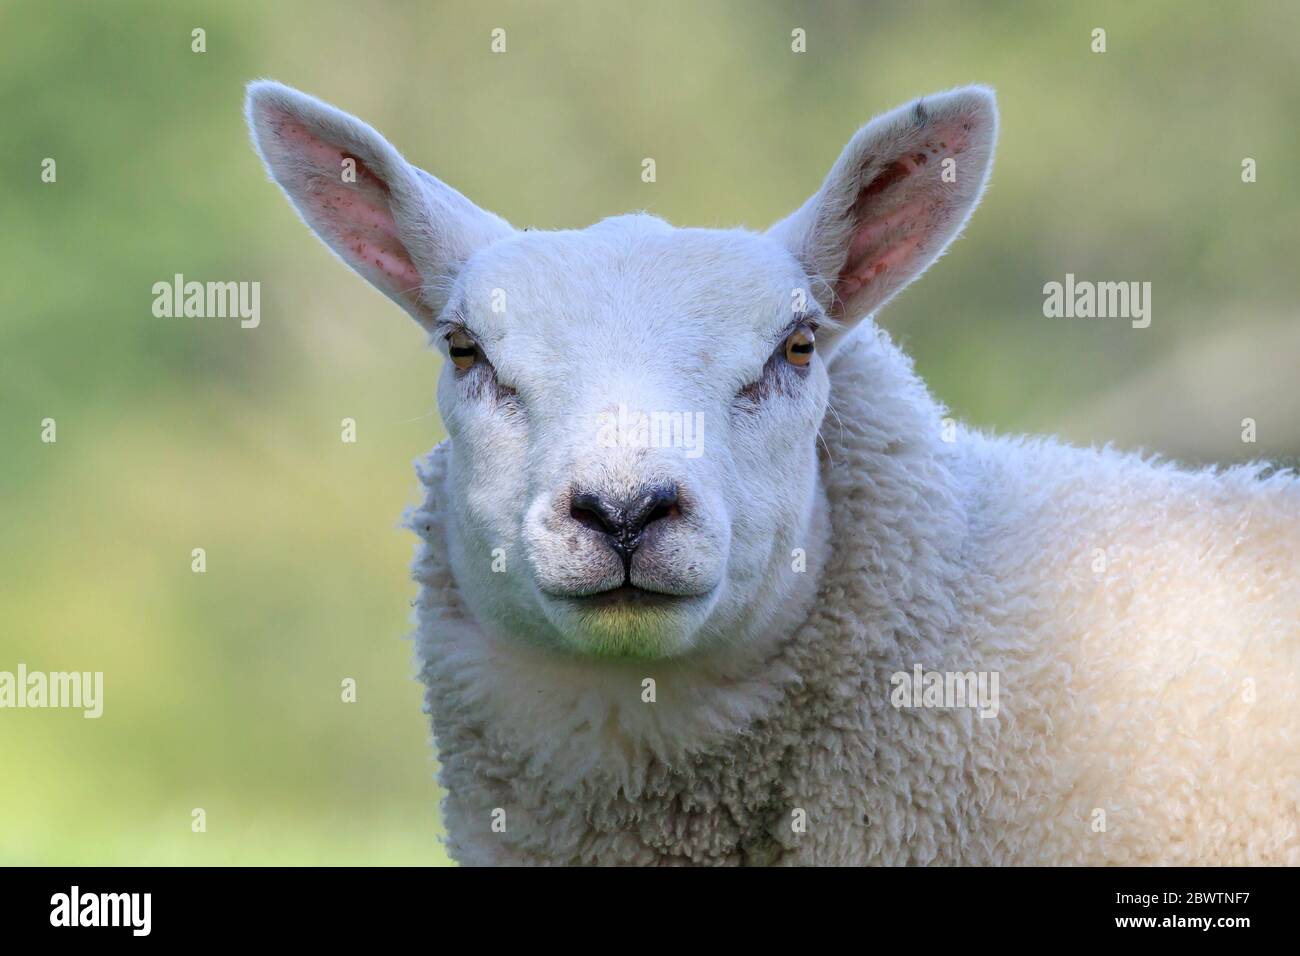 Close up on the head of a Cheviot sheep Stock Photo